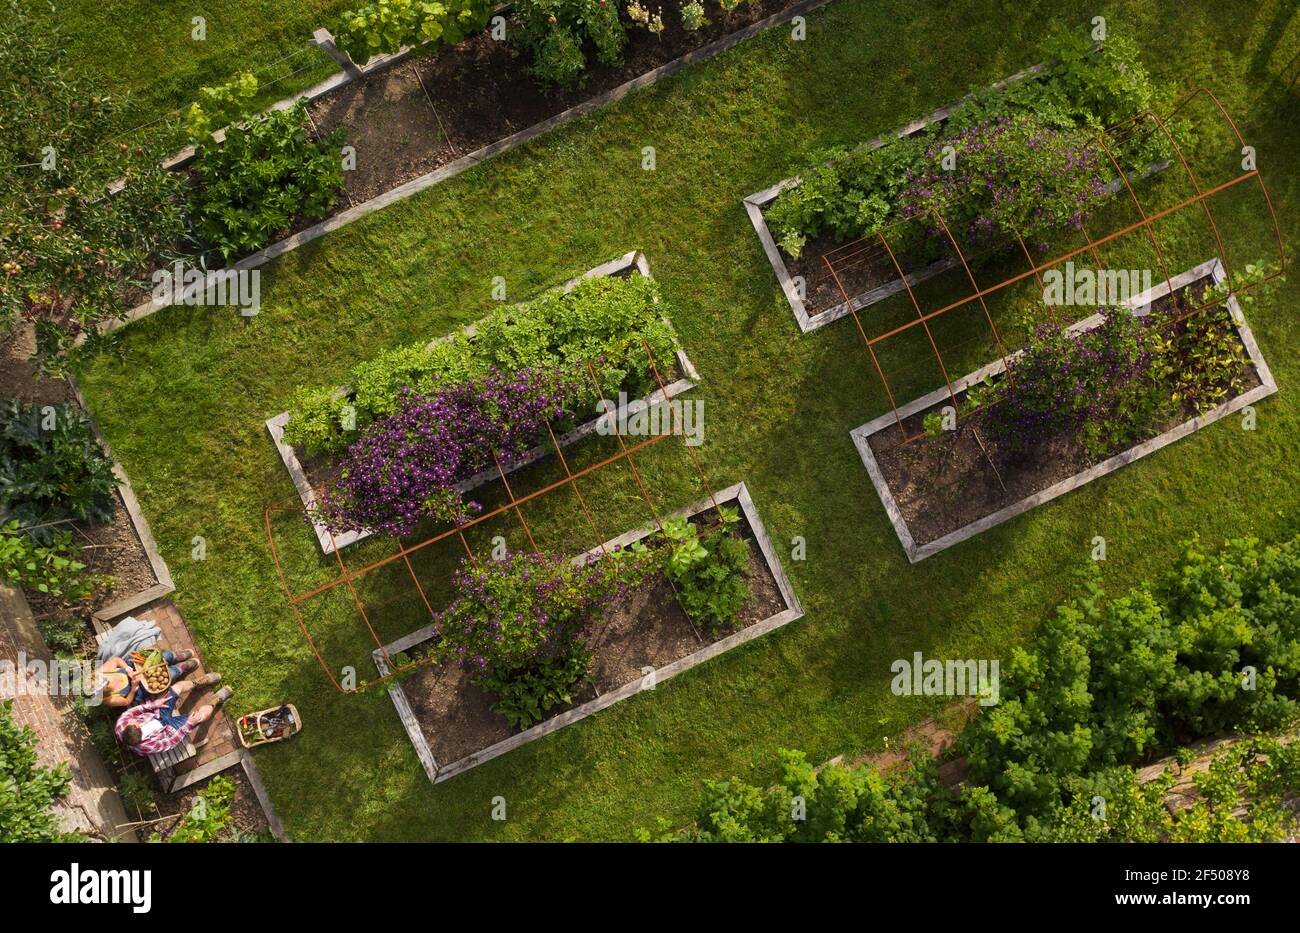 View from above couple in lush summer garden with raised beds Stock Photo